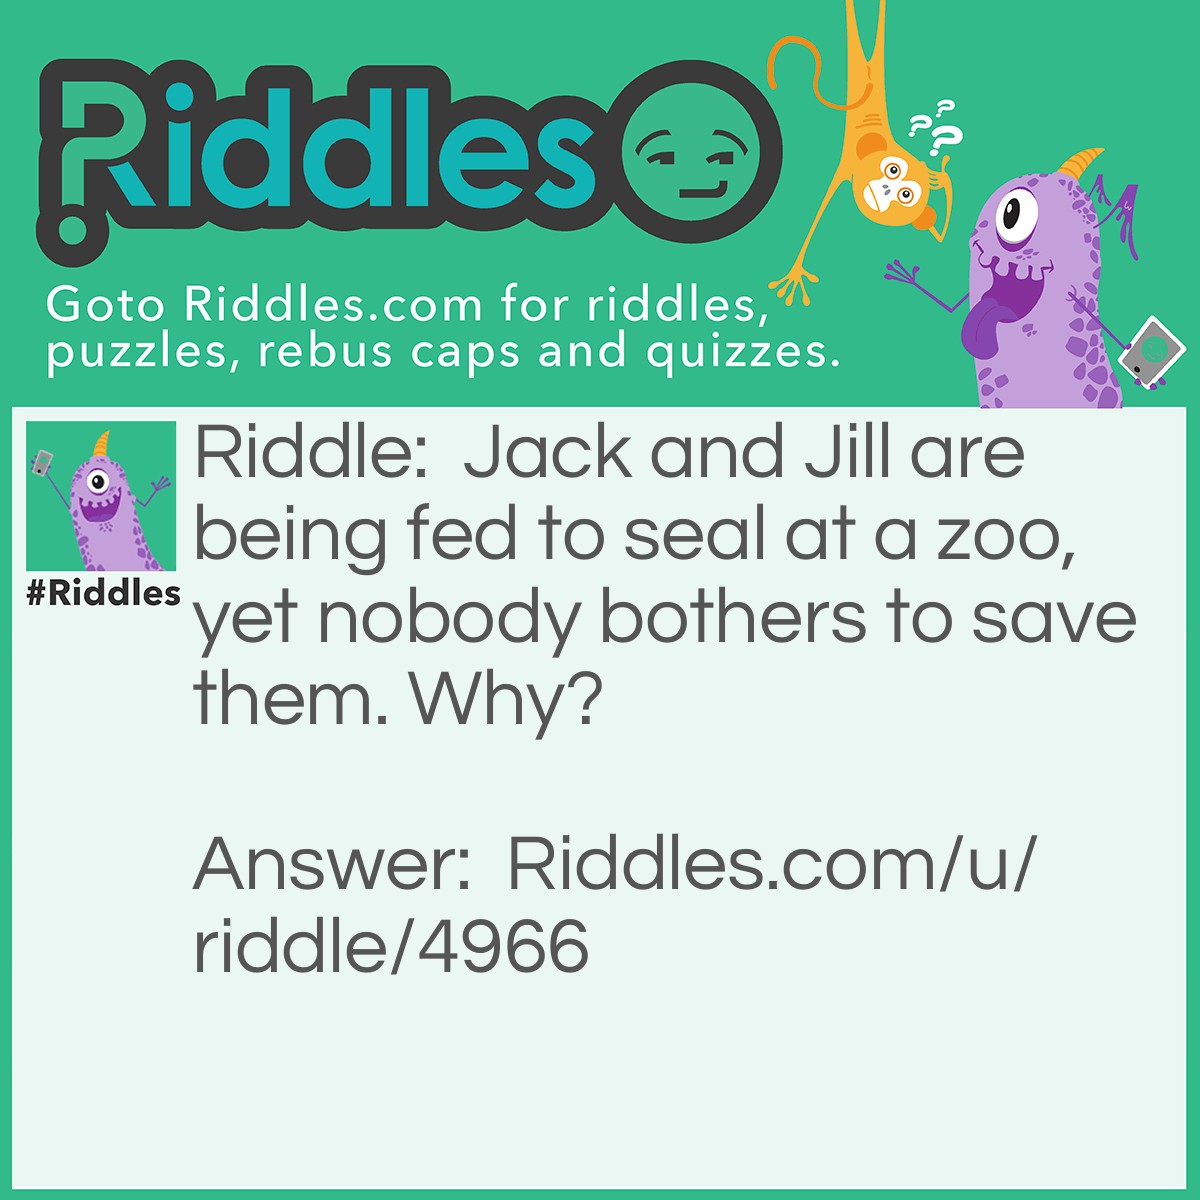 Riddle: Jack and Jill are being fed to seal at a zoo, yet nobody bothers to save them. Why? Answer: Jack and Jill are fish!